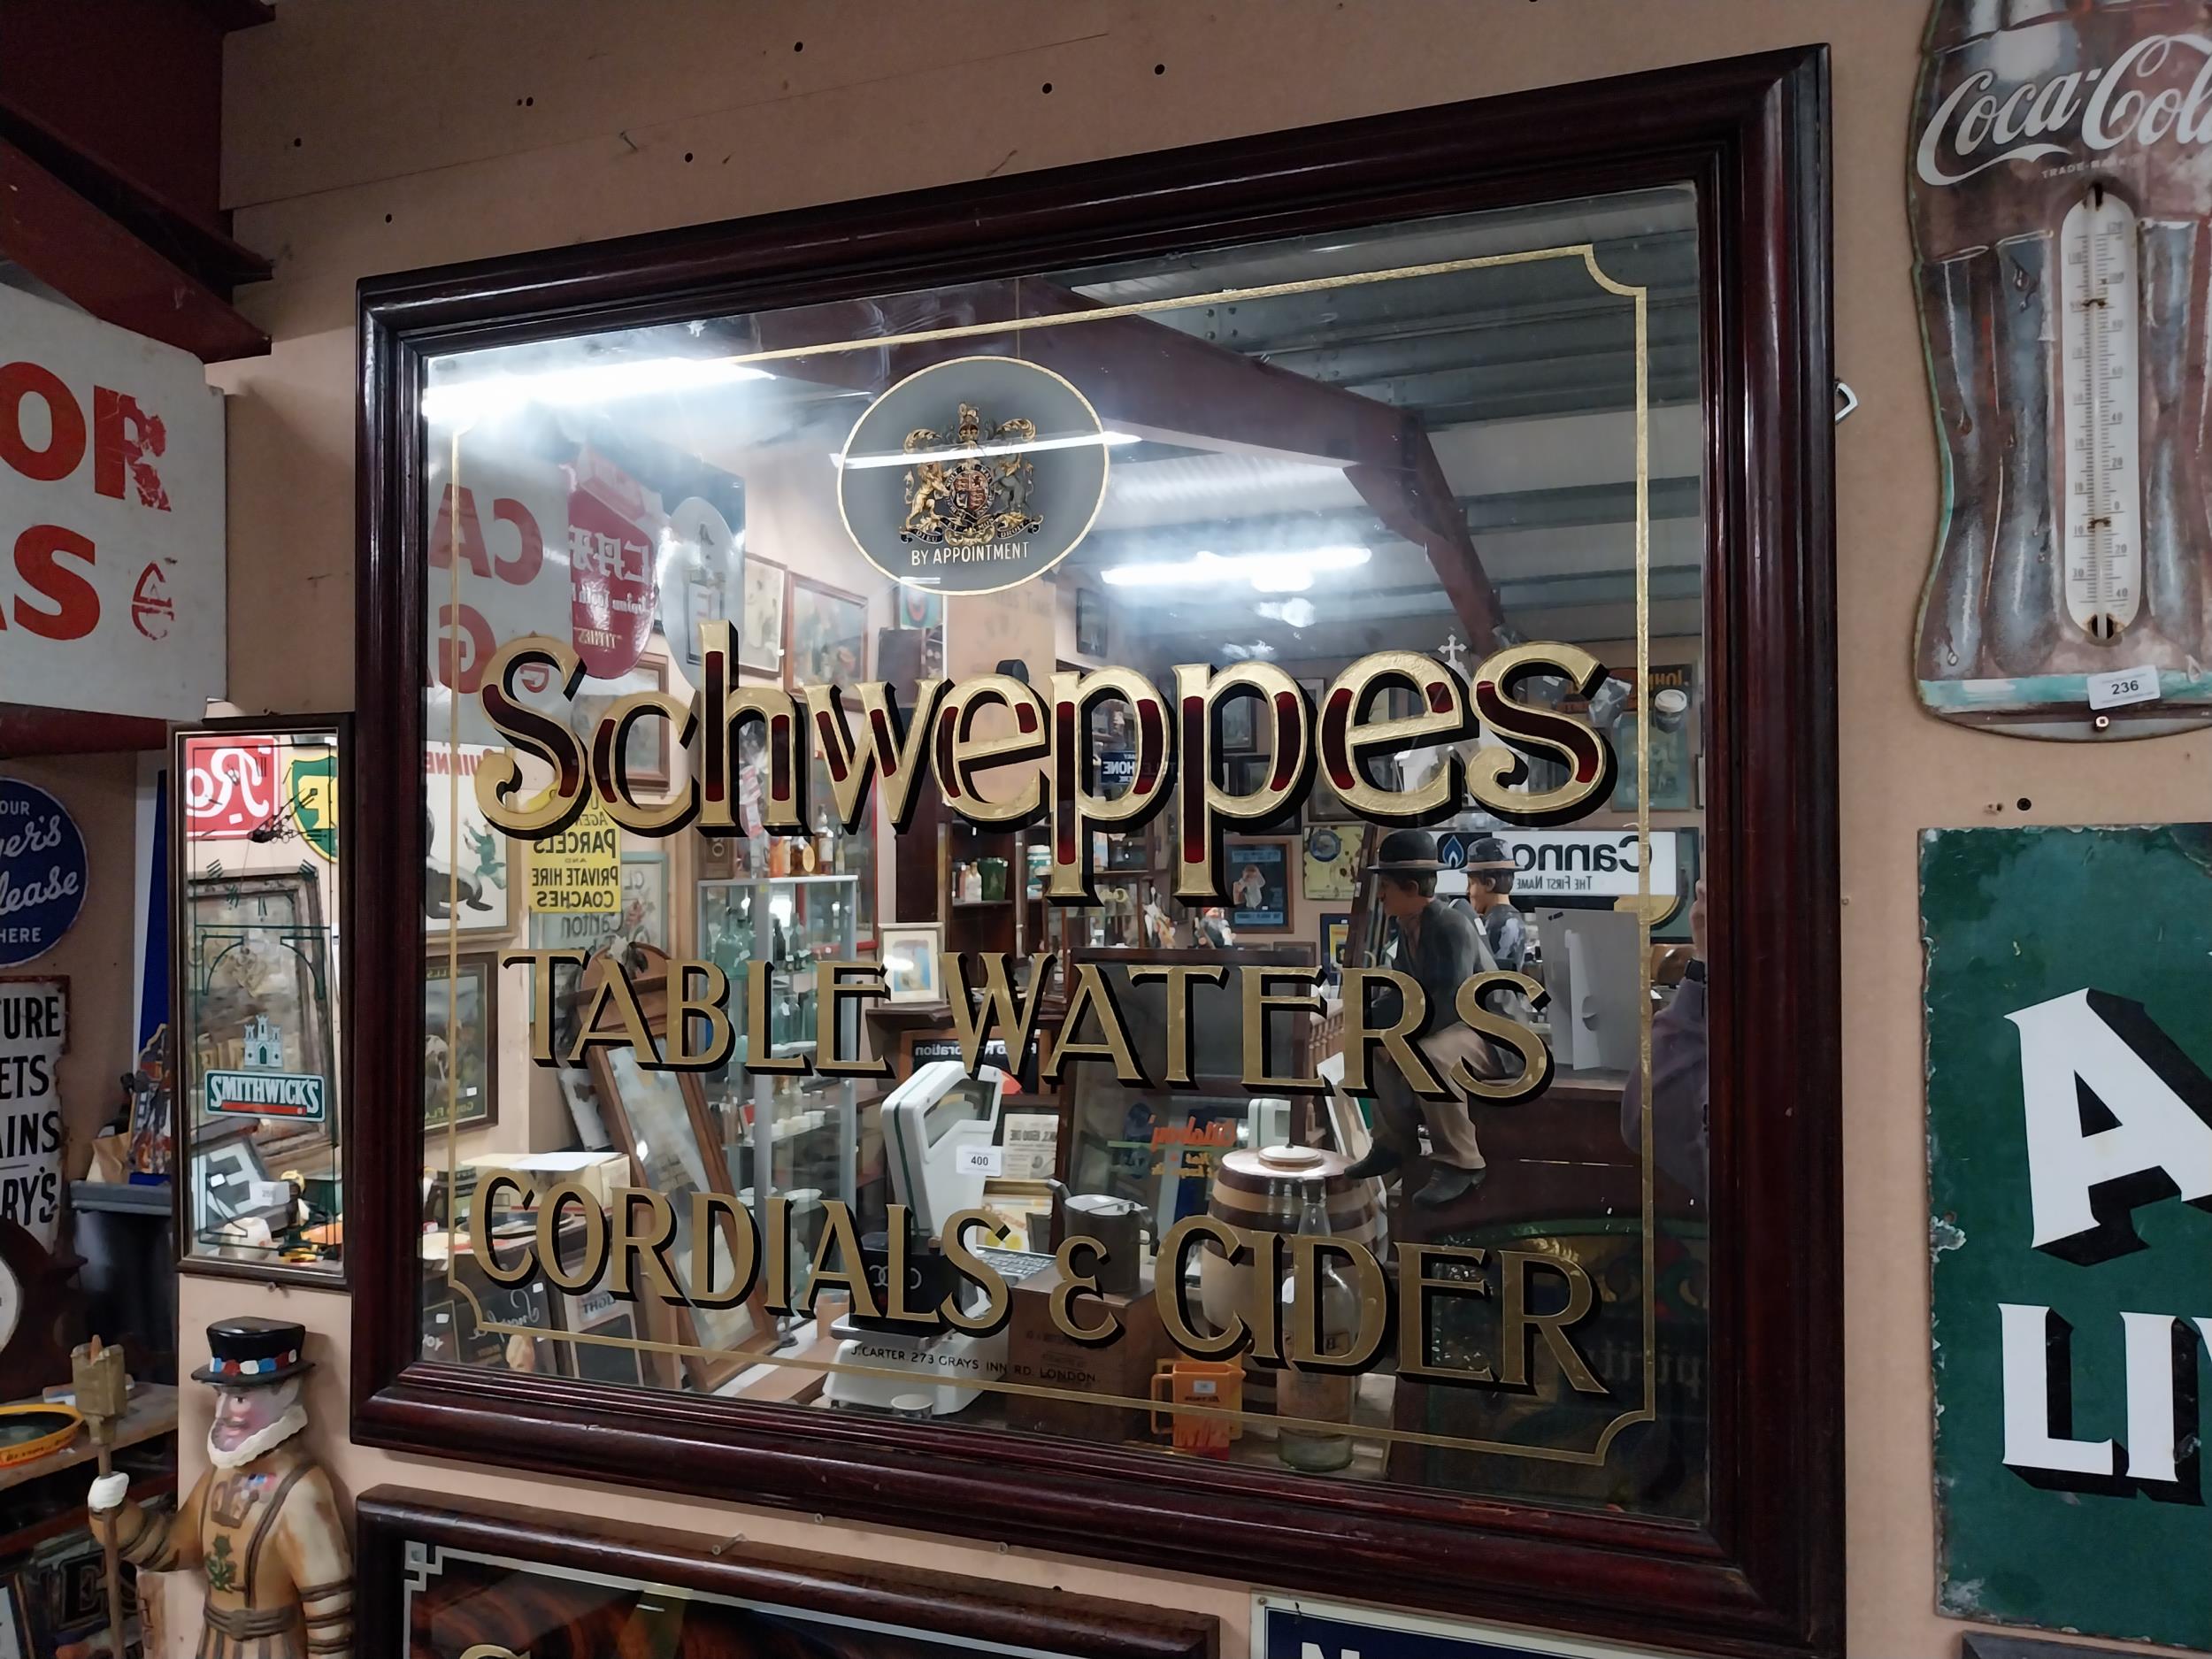 Schweppes Table Waters Cordials and Cider framed advertising mirror by J Carter 273 Grays Inn Road - Image 2 of 10